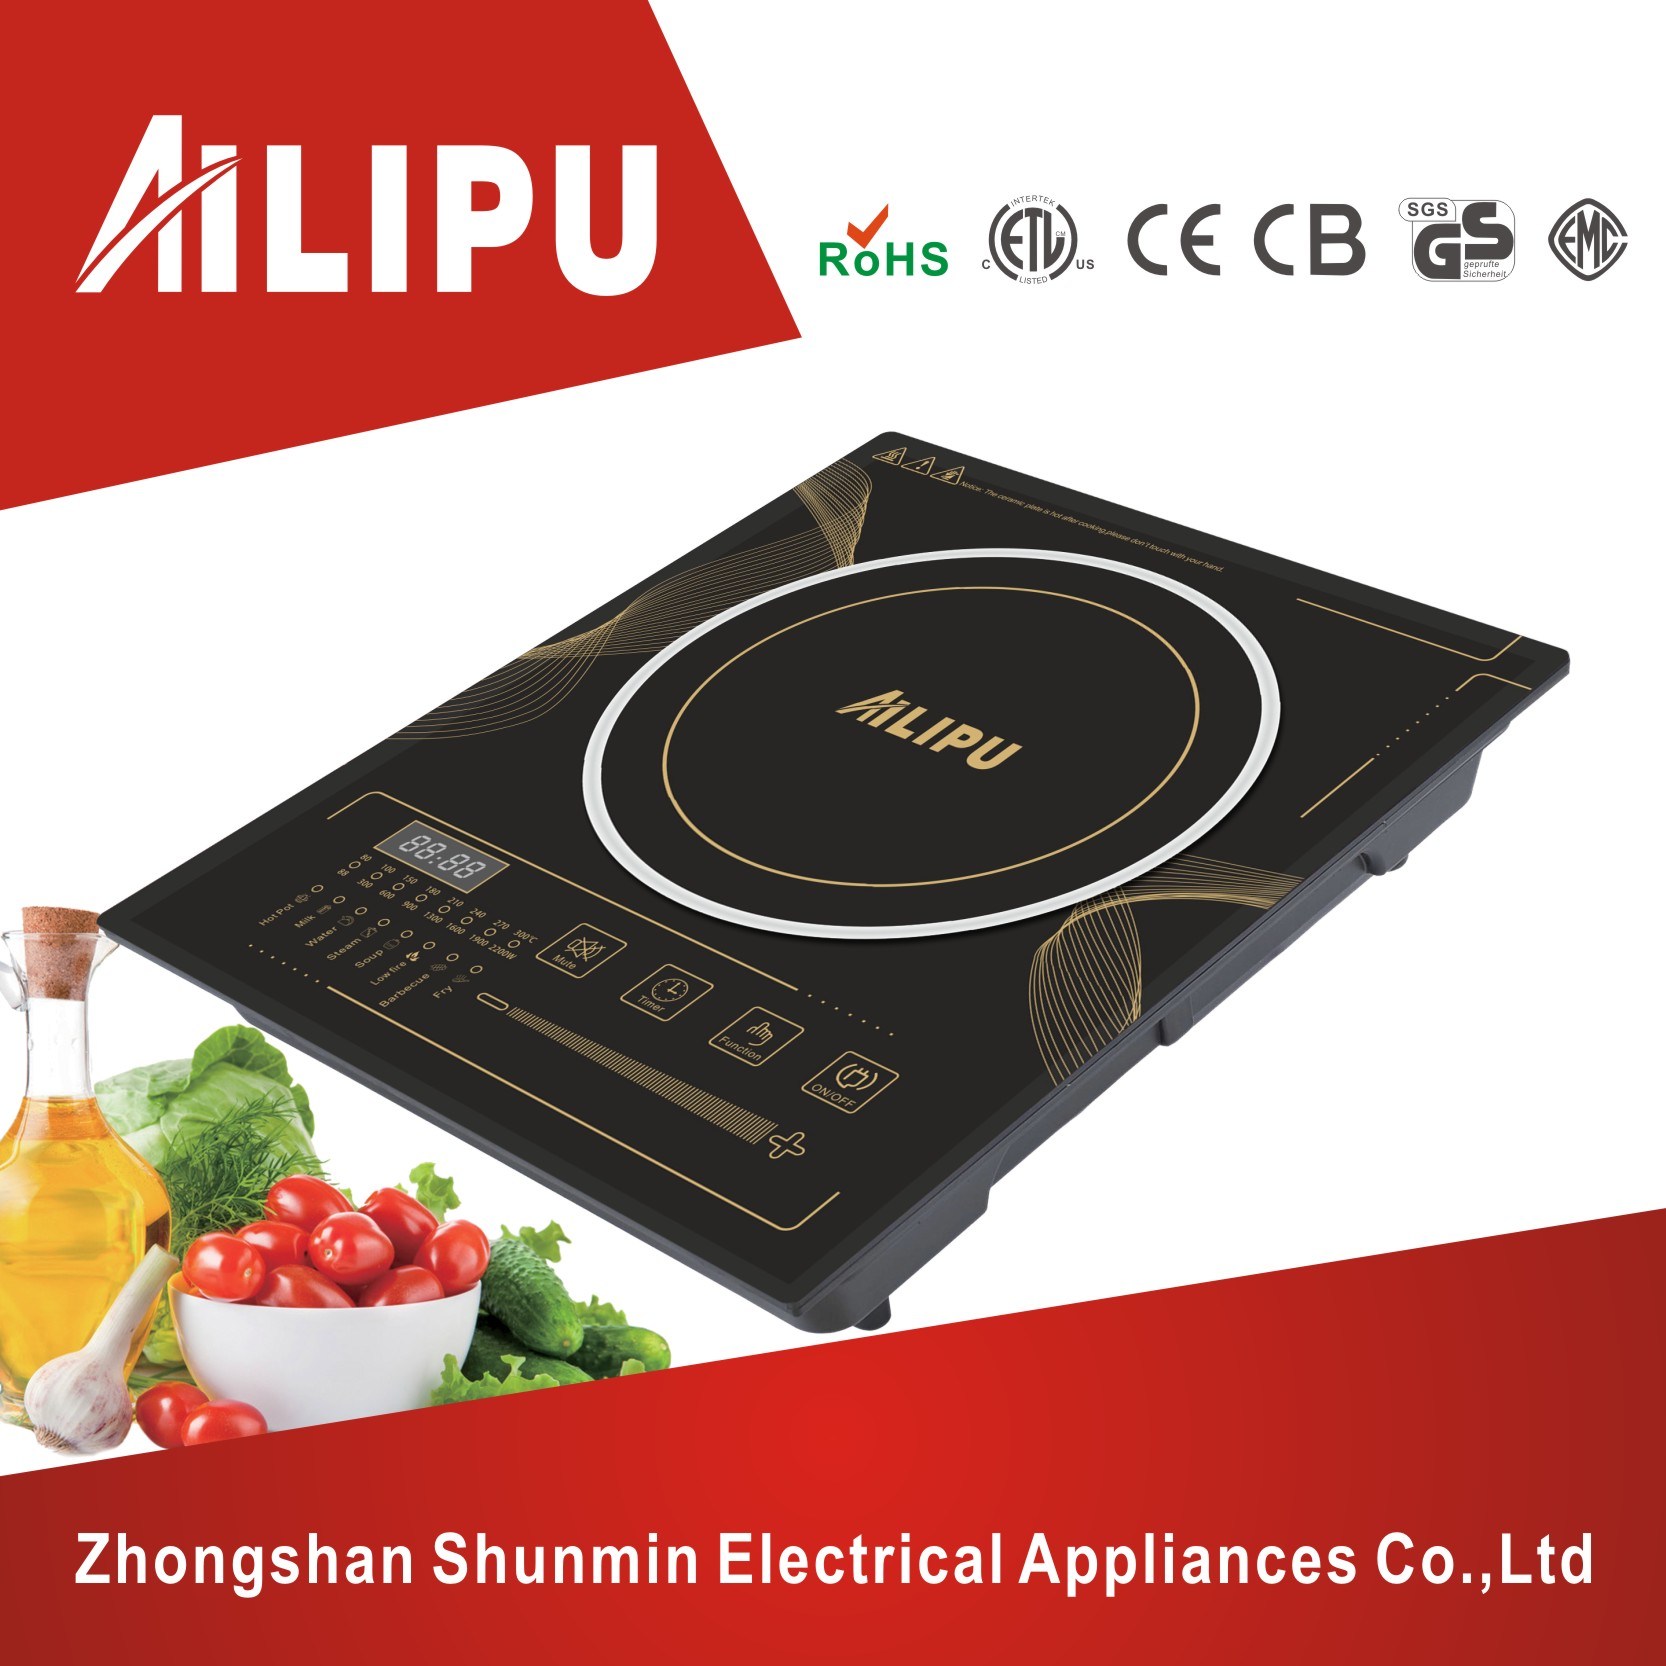 Fashionable Design Sliding Touch Control 4-Digi Display Electric Induction Cooker/Hob/Stove/Hotplates